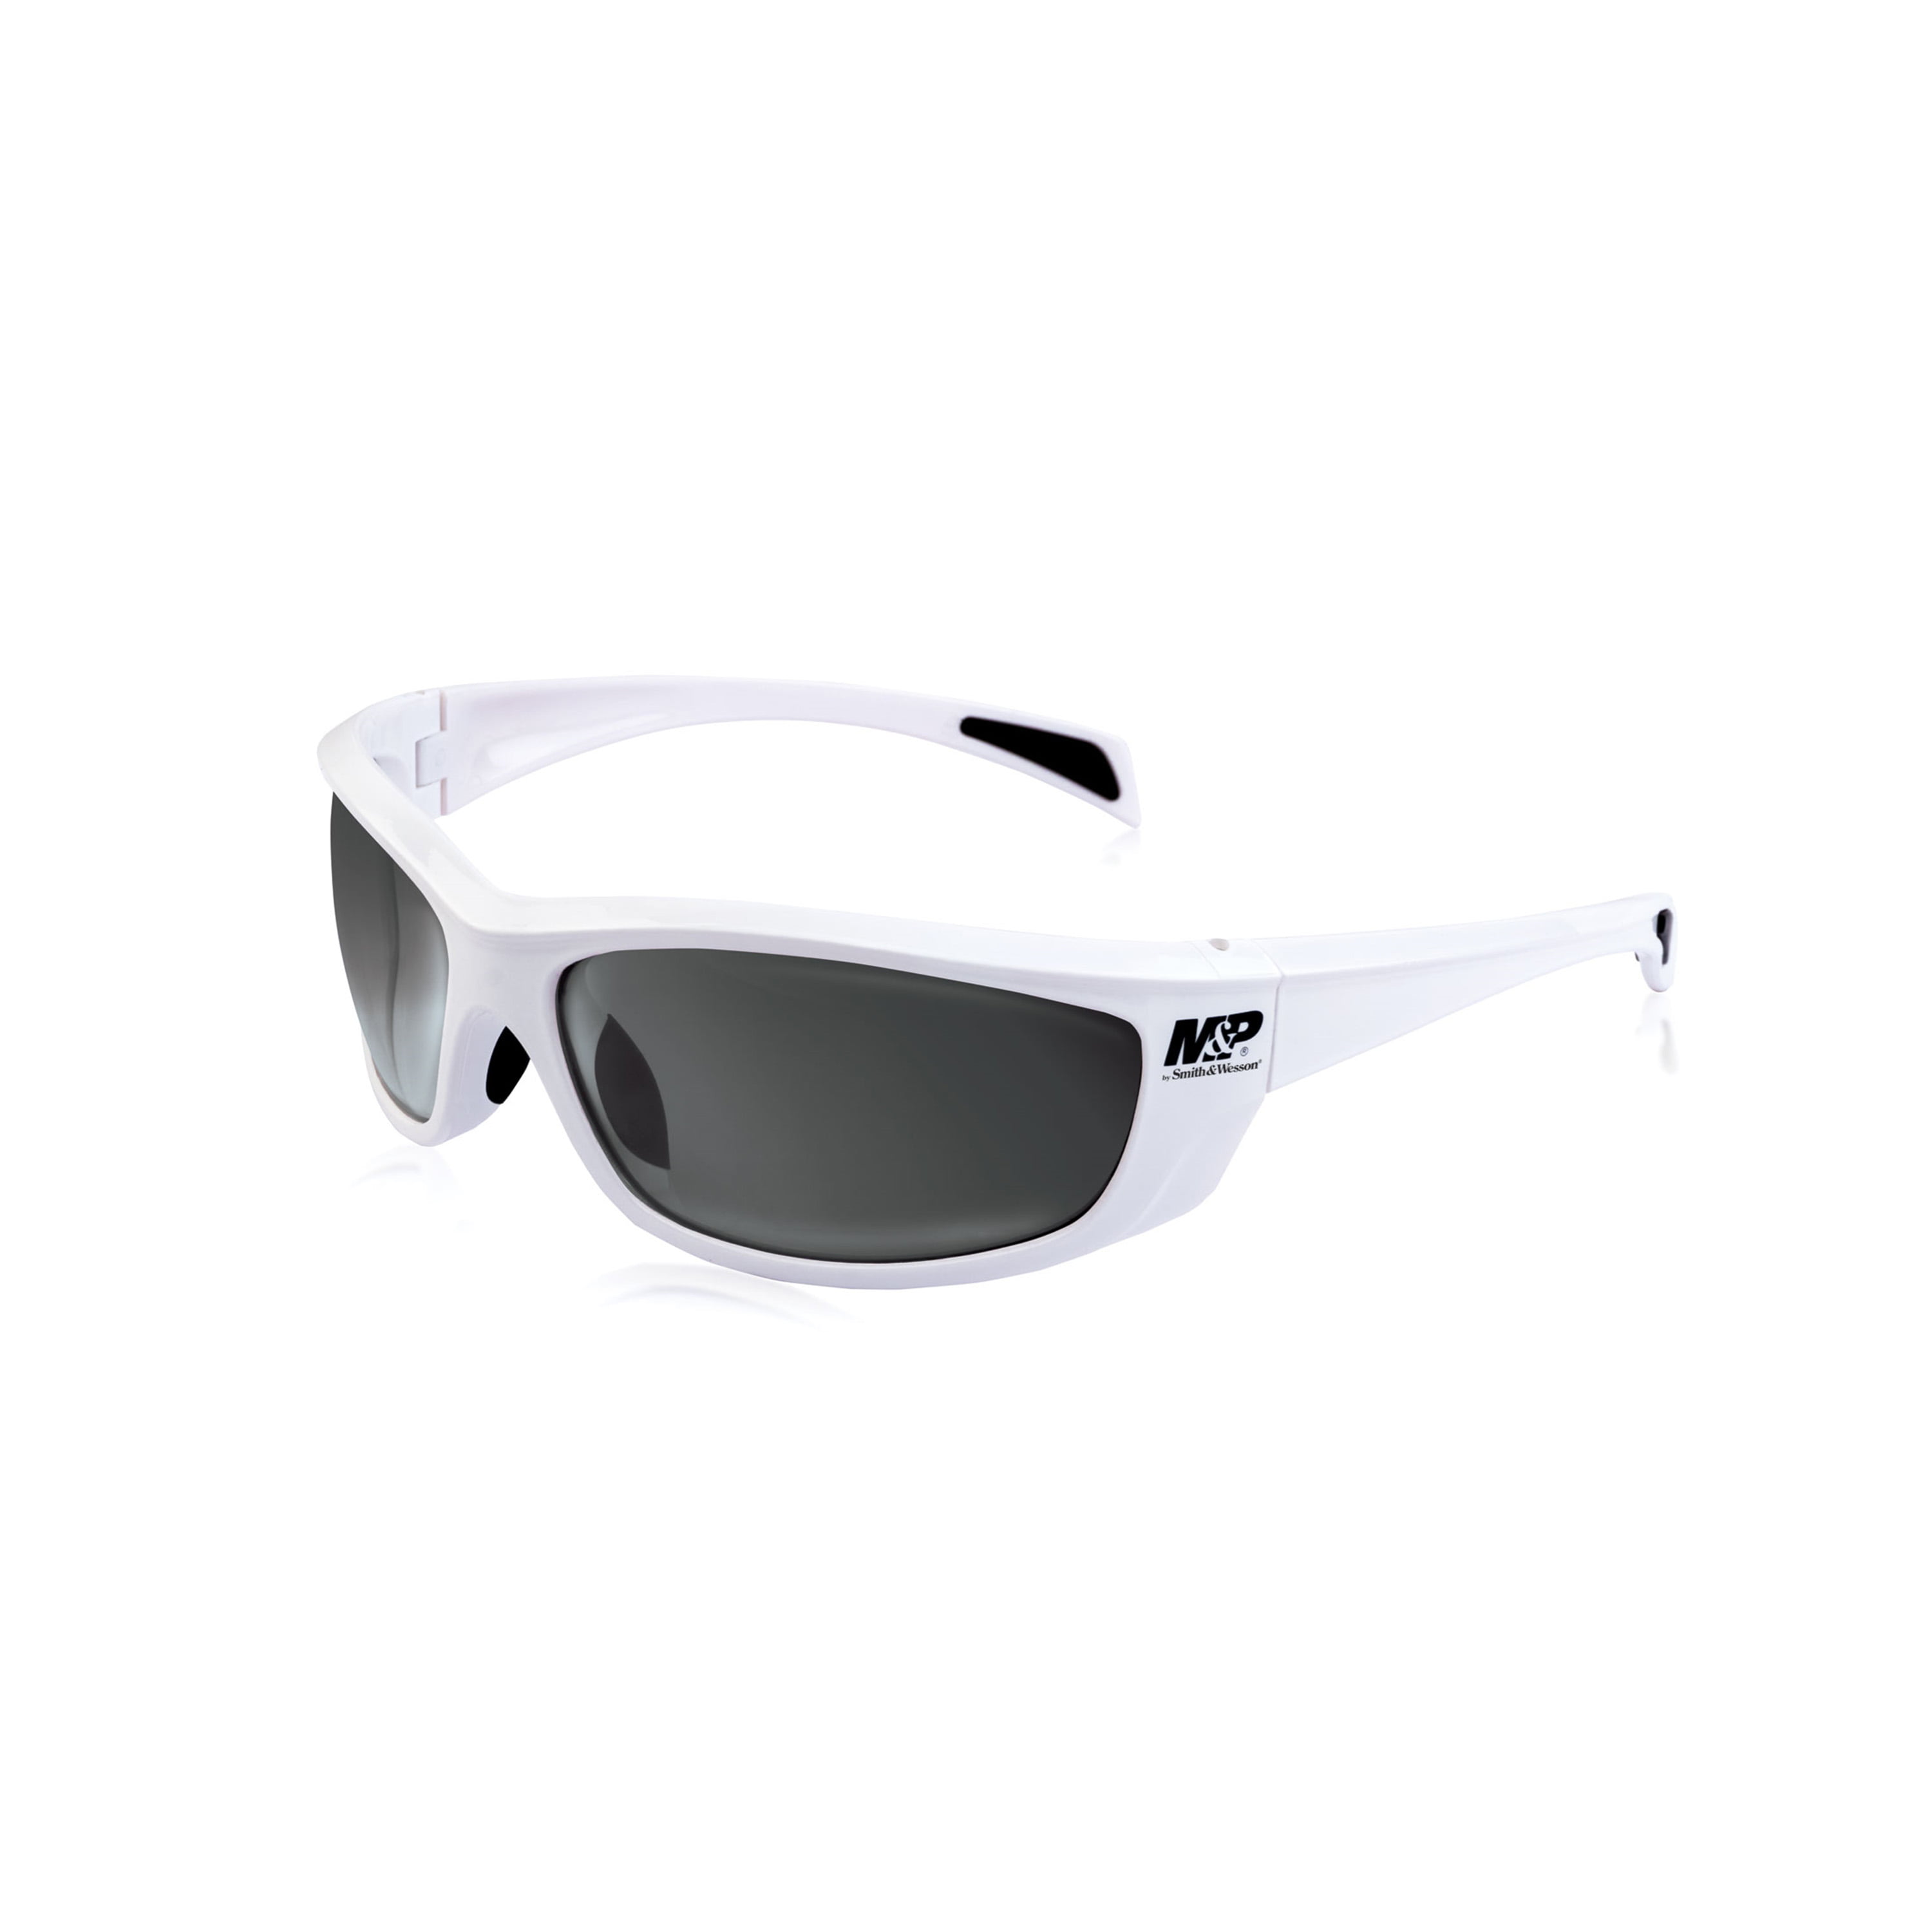 Oakley Trap Shooting Glasses - Best Oakley Shooting Safety Glasses 2020 ...